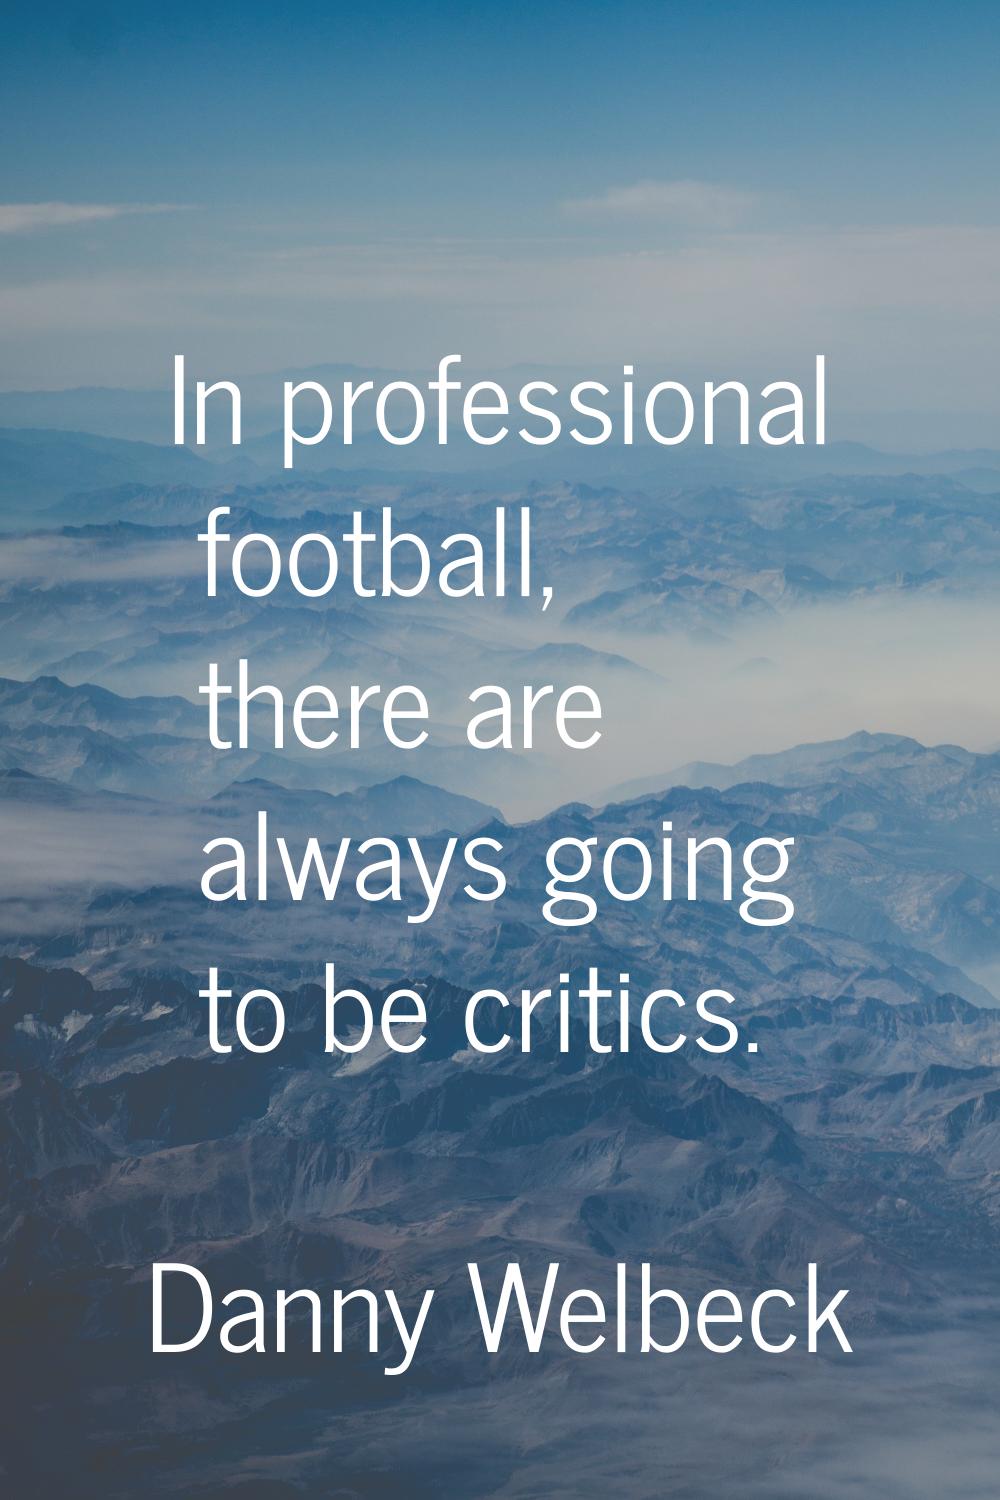 In professional football, there are always going to be critics.